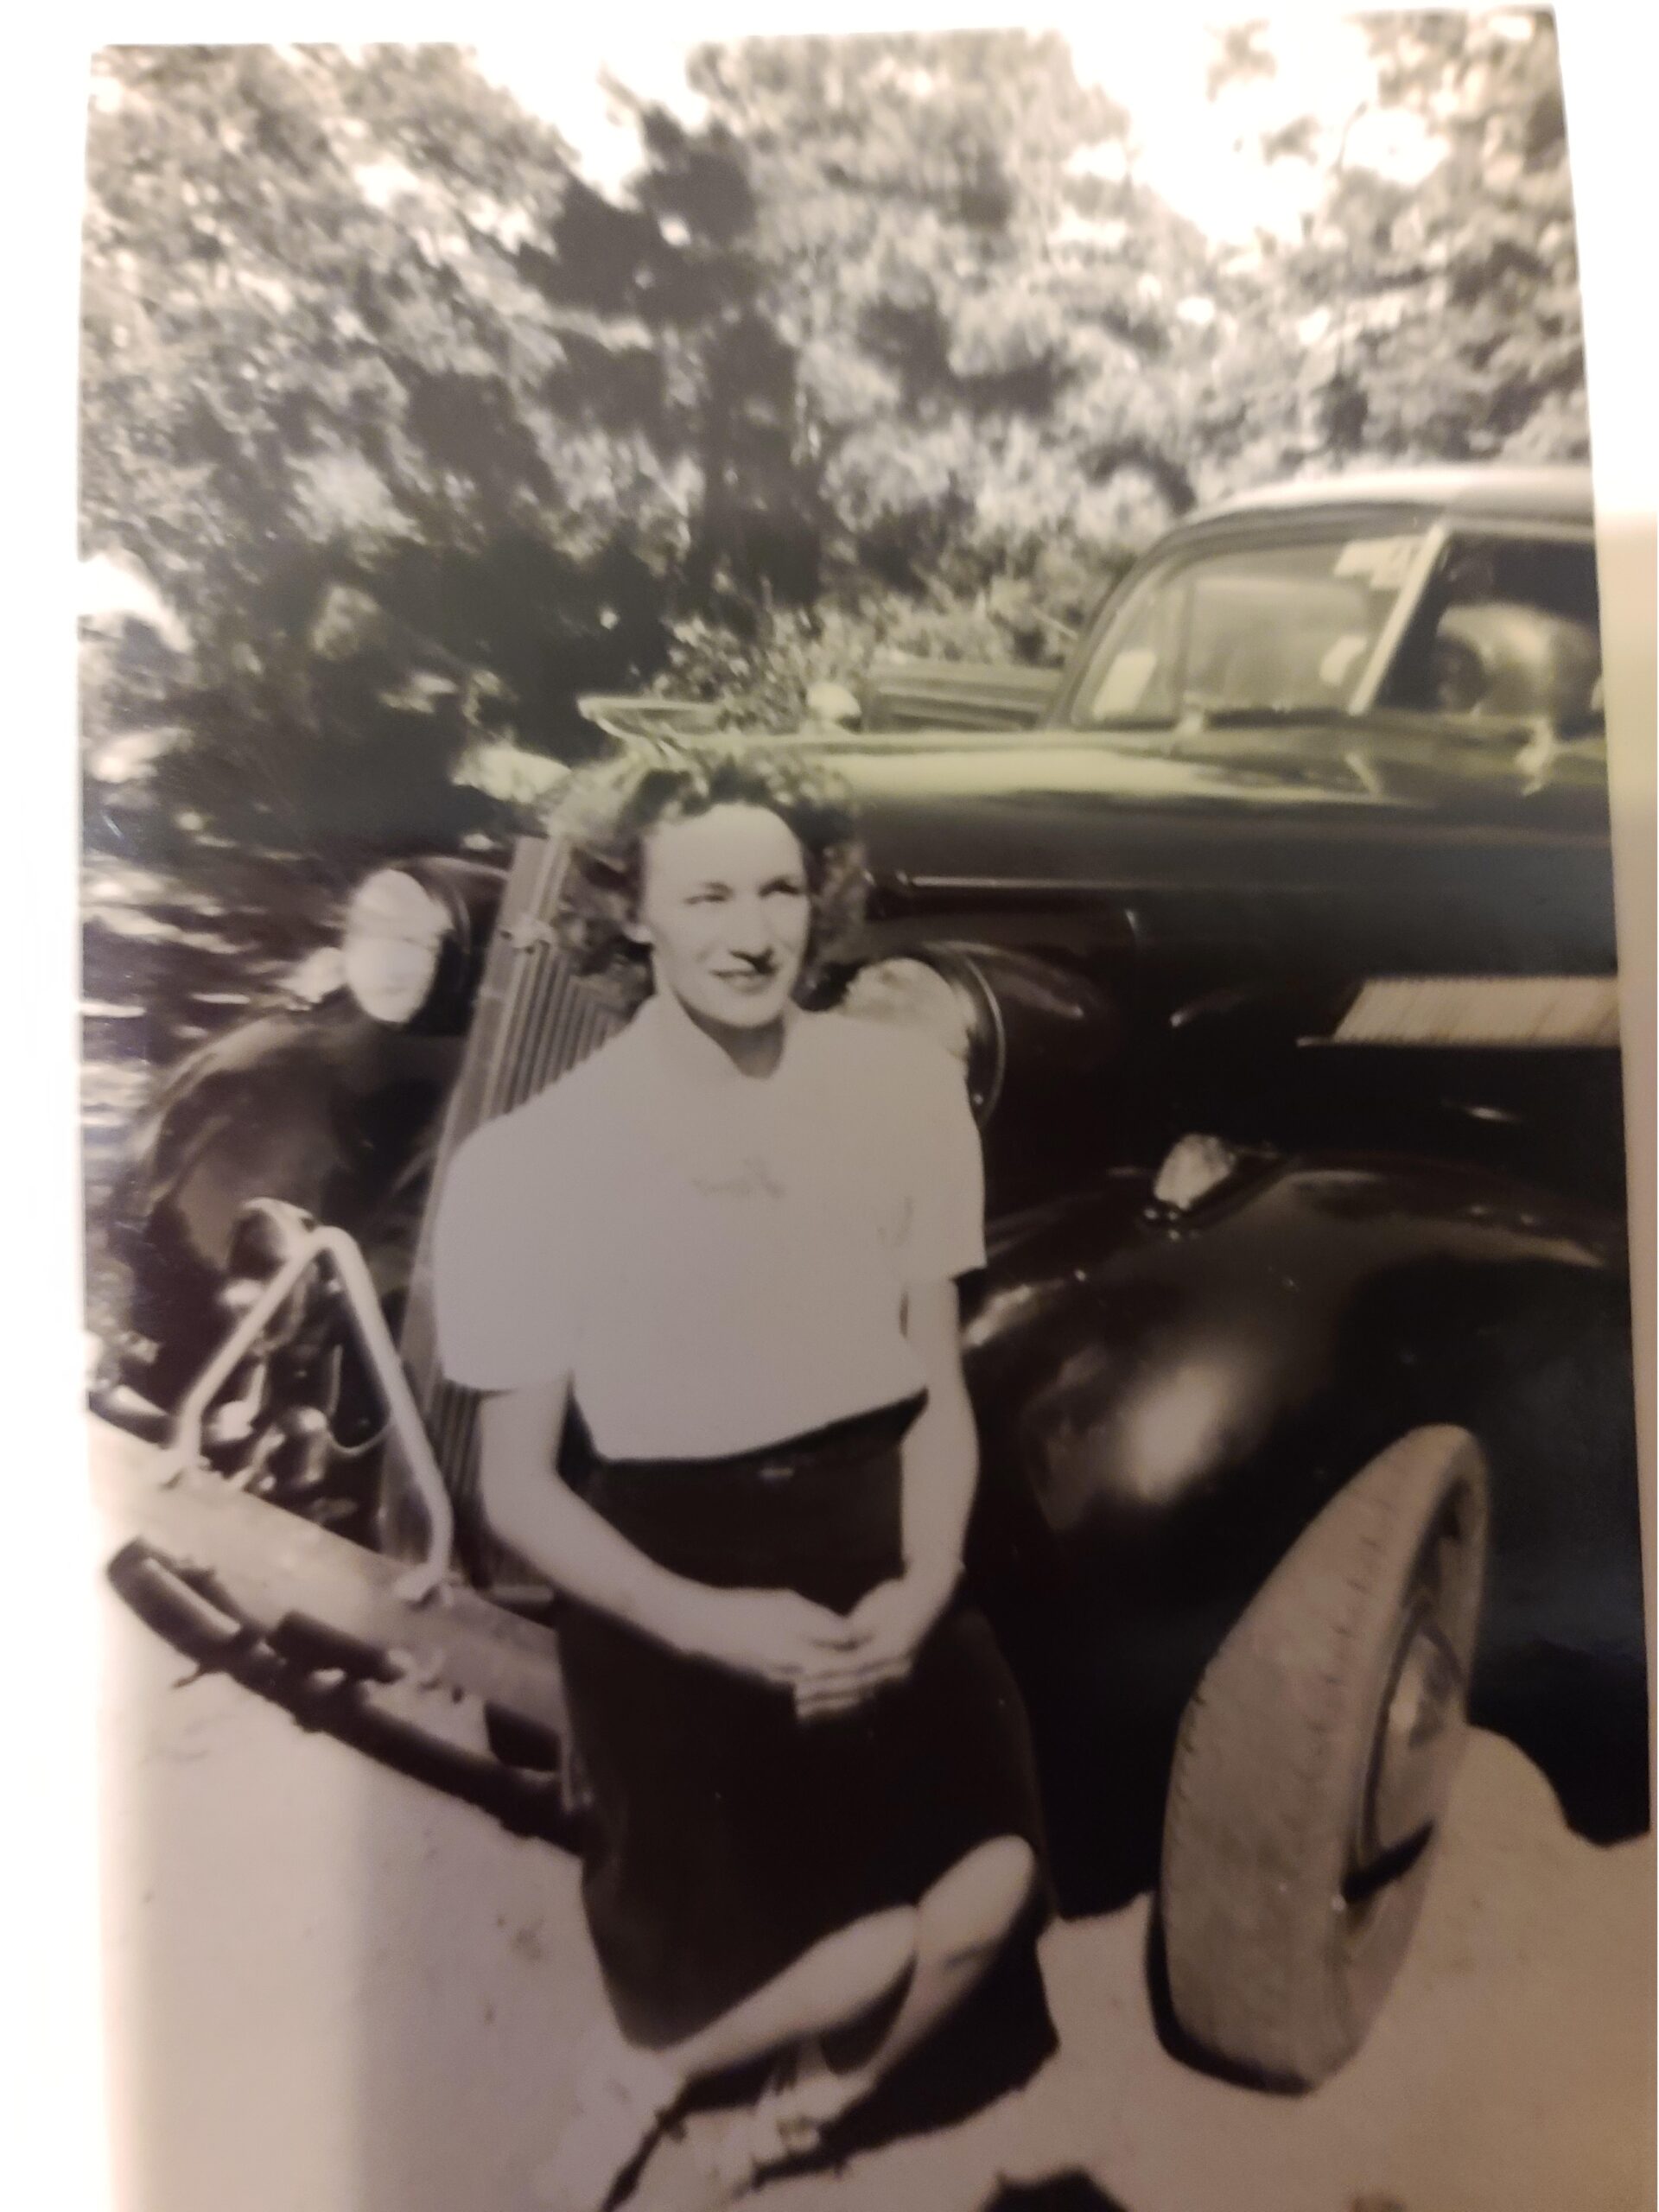 old photo of a woman standing by a car